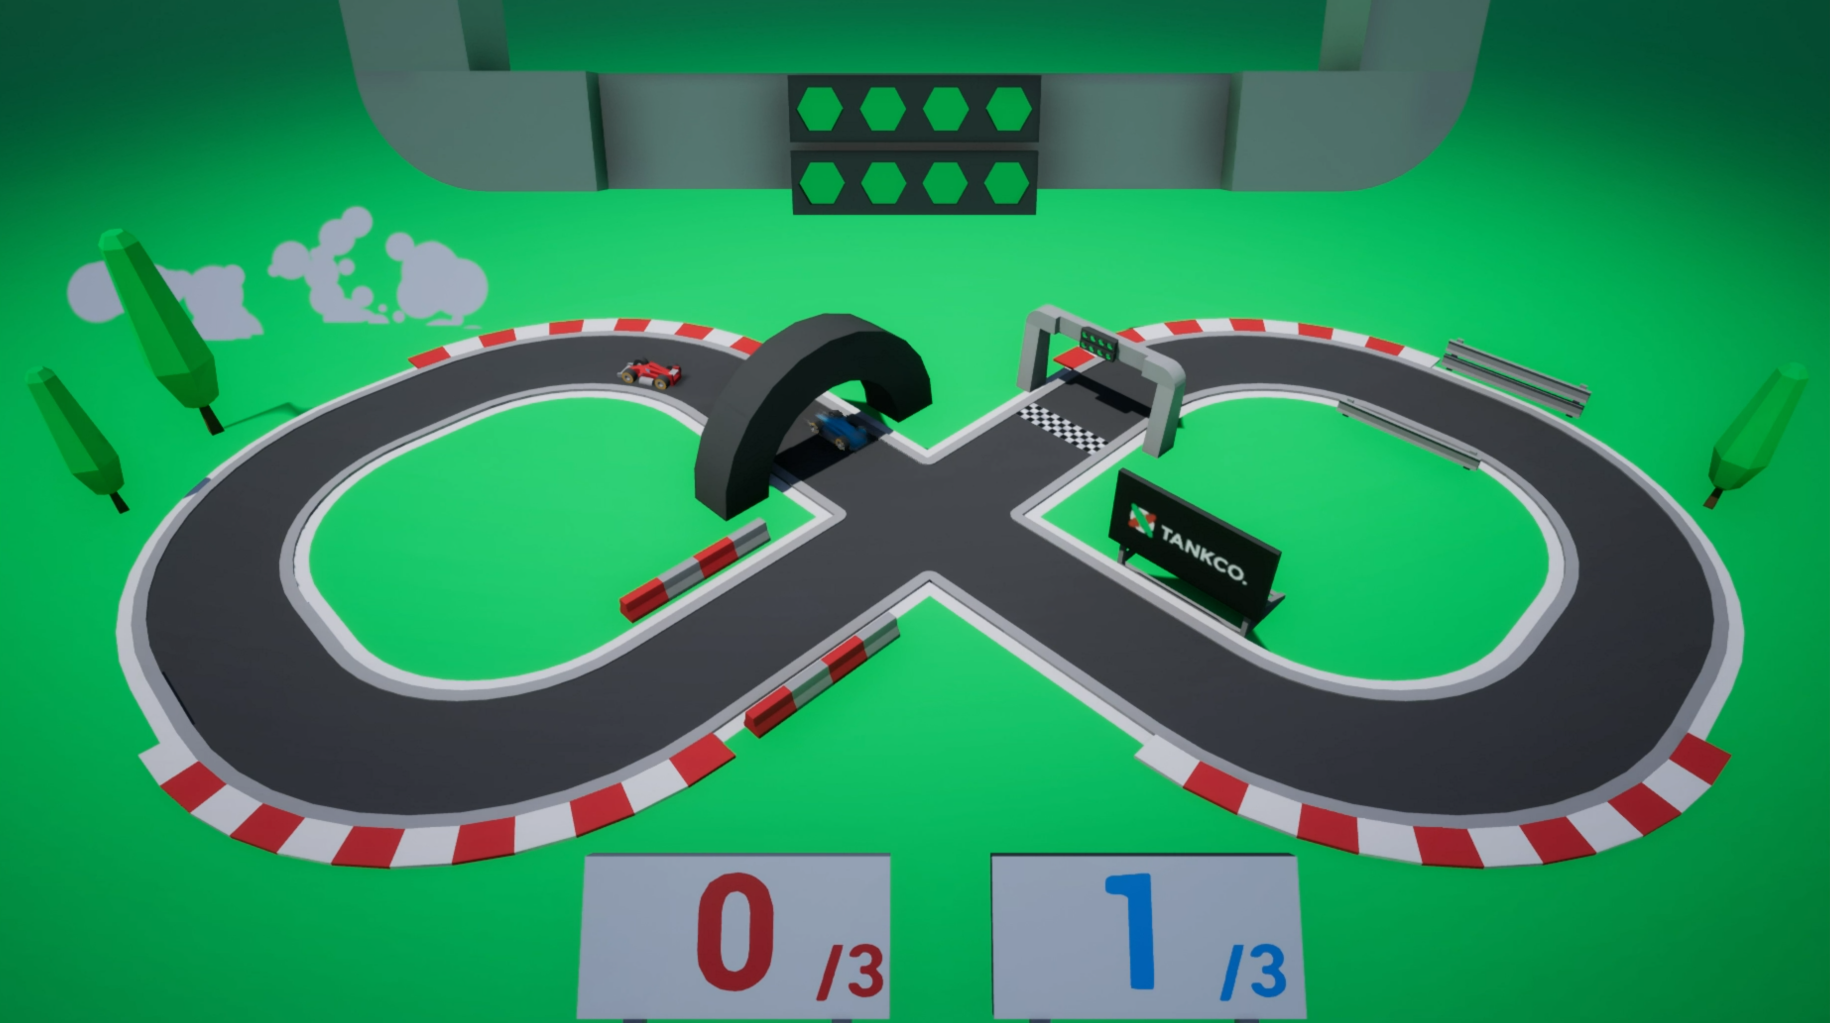 [Single Button Slot Race. Made by Barry Soilleux at Sumo Sheffield for the 2022 One Button Game Jam]